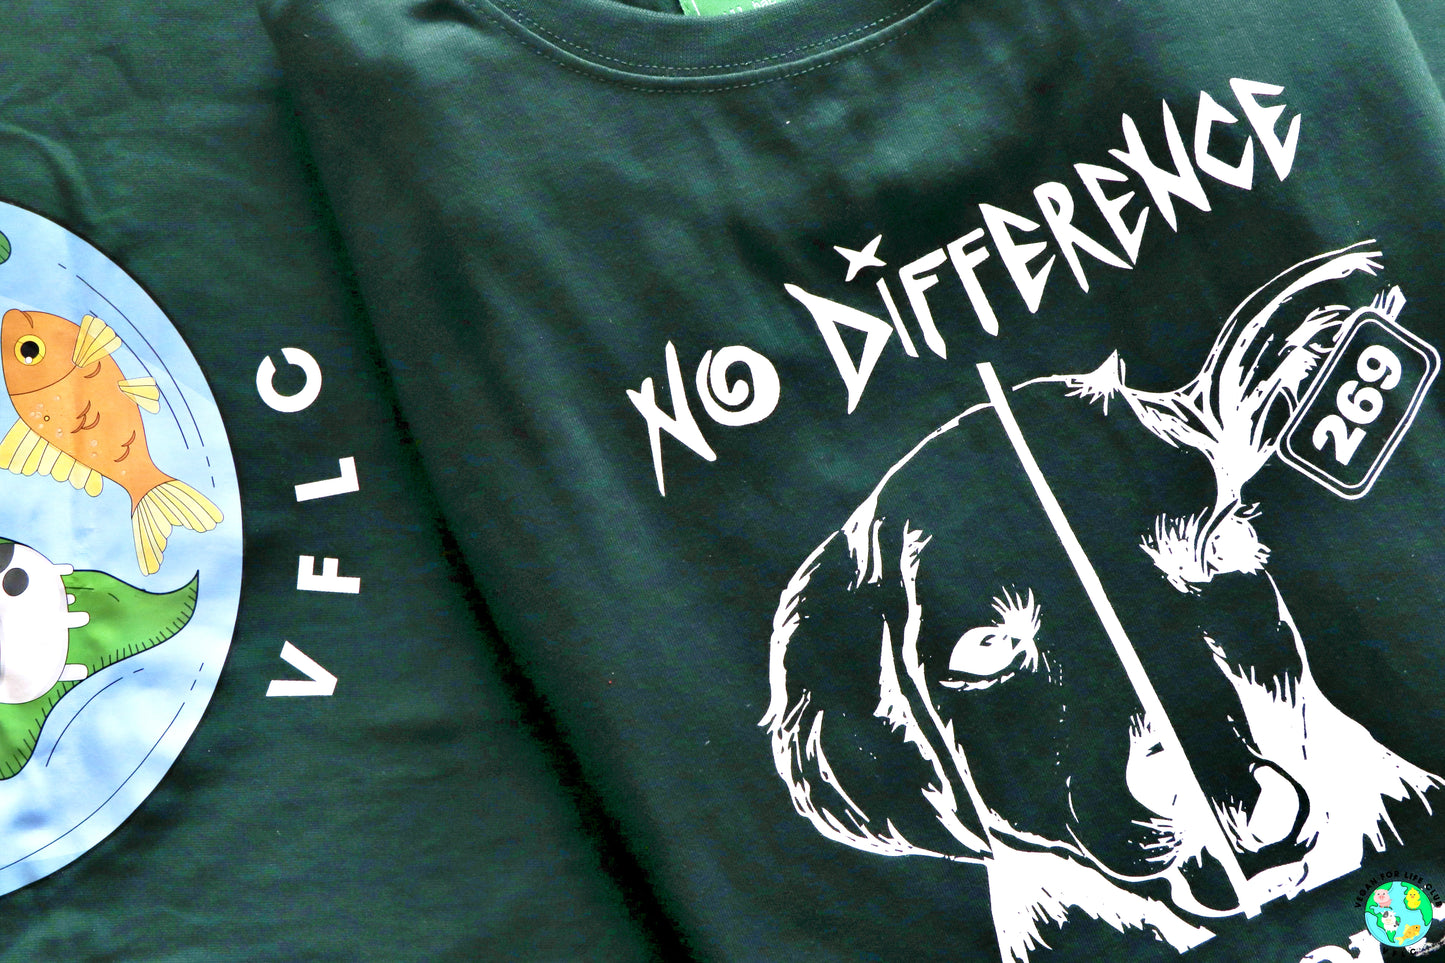 NO DIFFERENCE CHANGE PERCEPTION Tee! - VEGAN FOR LIFE CLUB